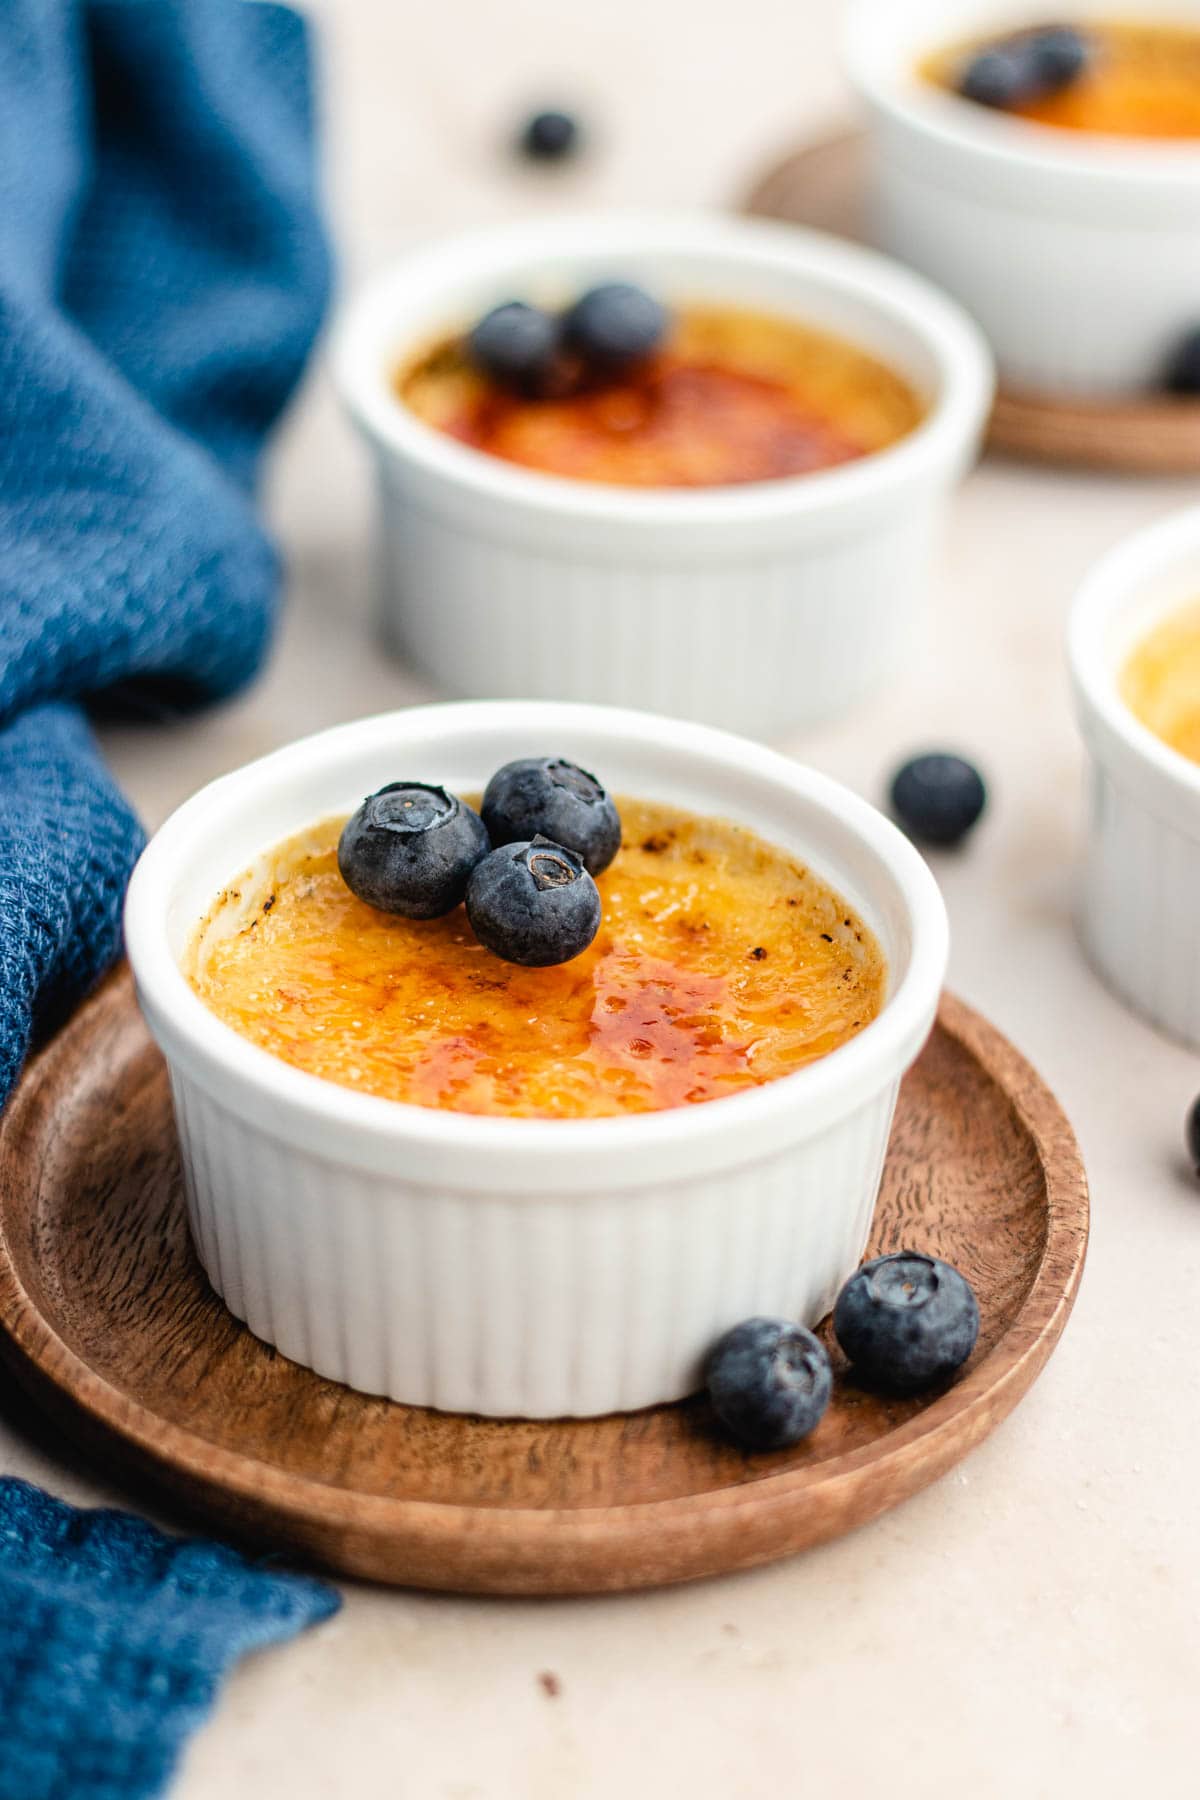 Creme Brulee in dishes